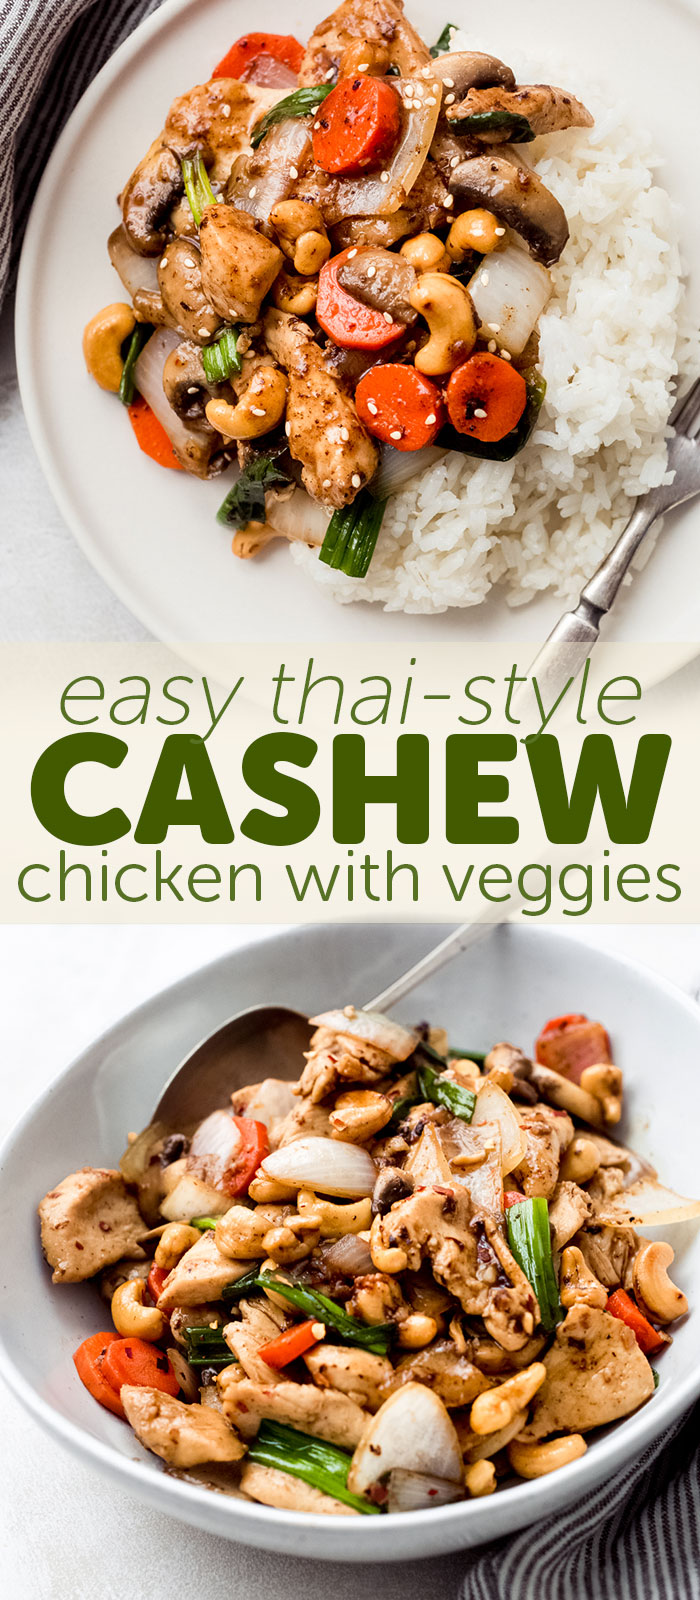 Easy Thai Cashew Chicken that takes just like your favorite Thai take out! Made with tender chicken, crisp veggies, and an addicting brown sauce! #stirfry #chickenstirfry #cashewchicken #thaicashewchicken #easychickenrecipes | Littlespicejar.com